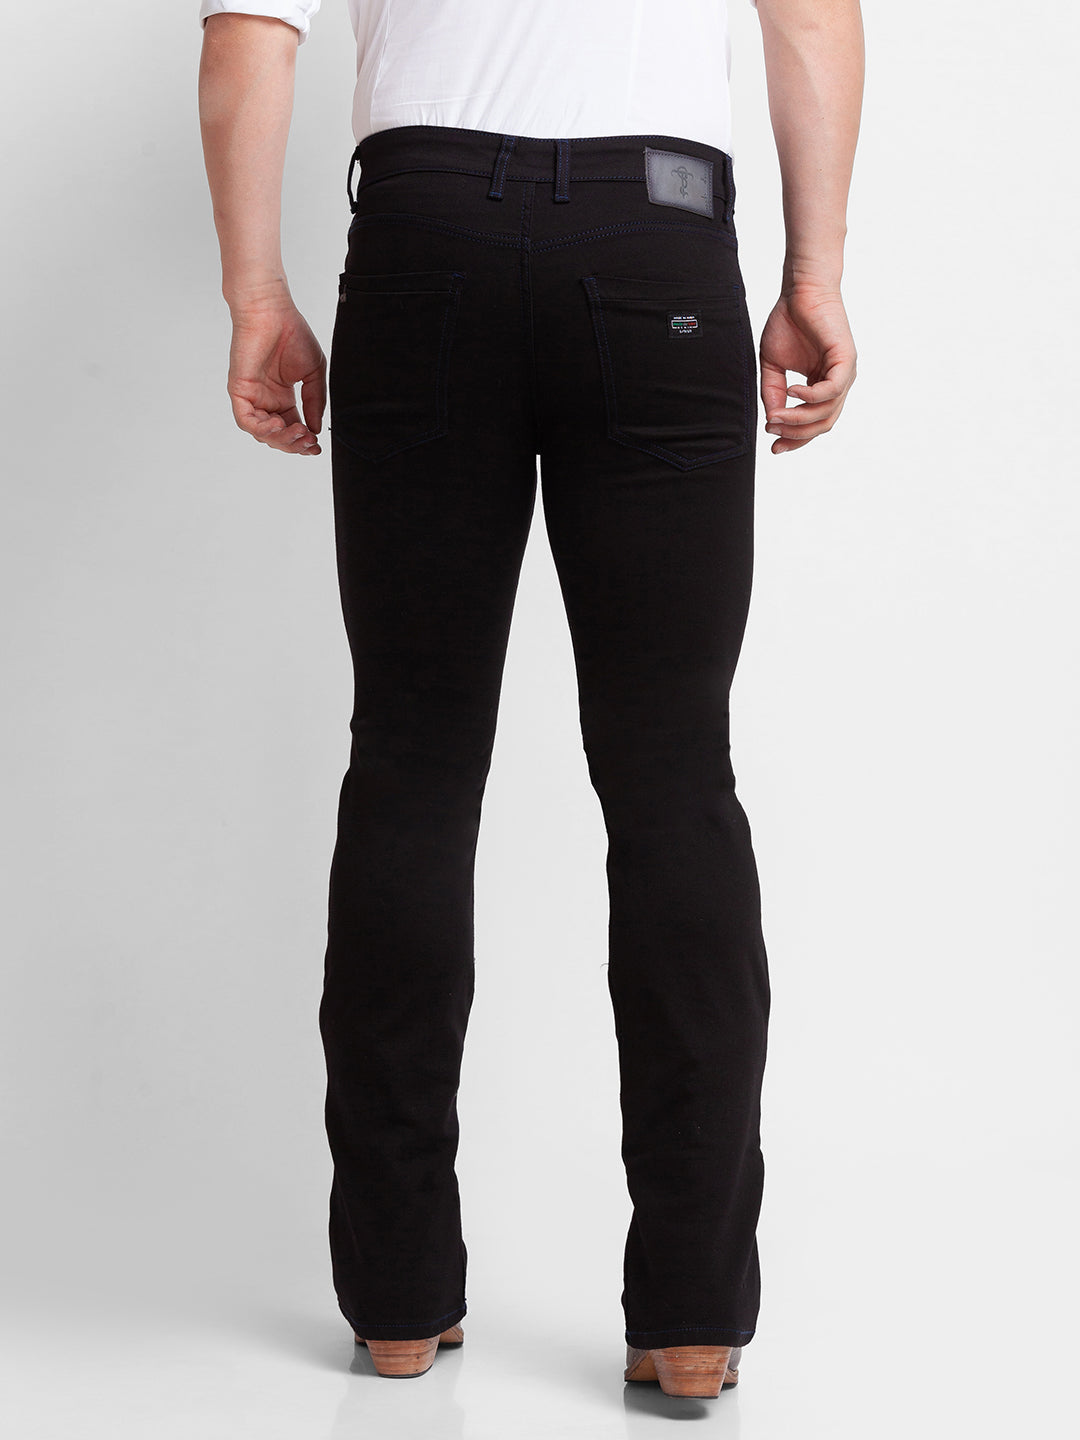 Black Distressed Bootcut Jeans for Men